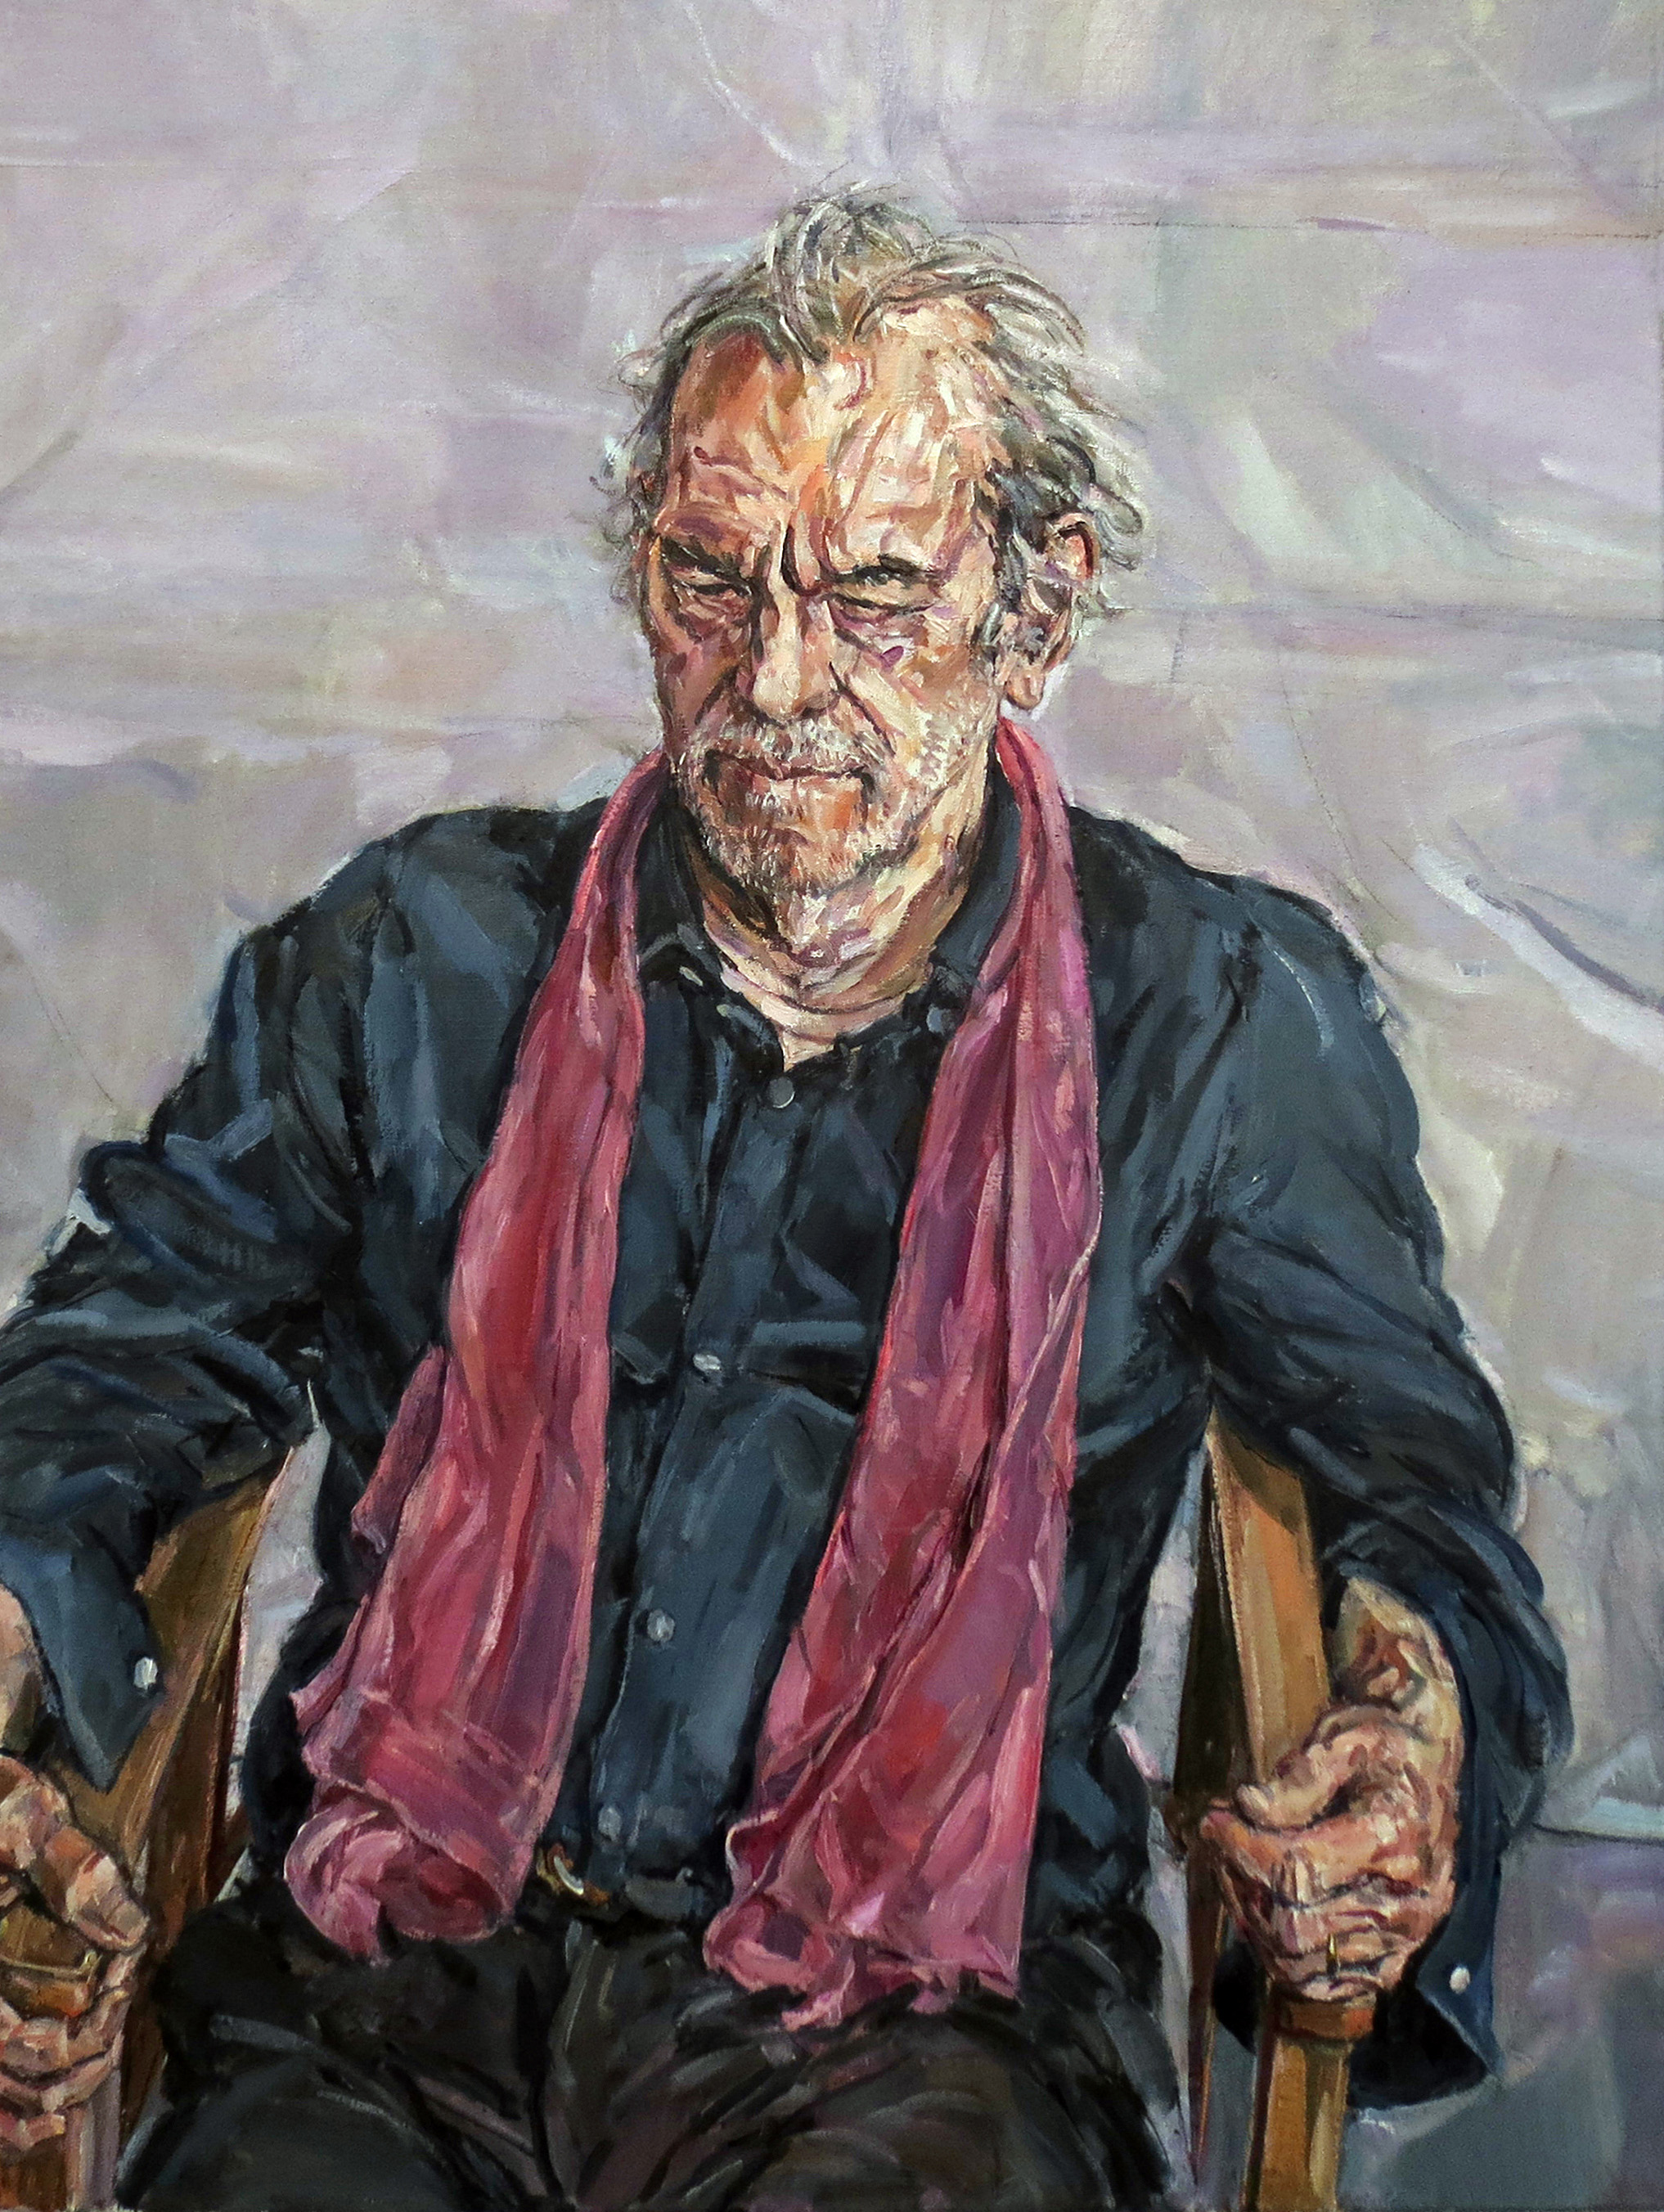 An oil portrait painting of a grey-haired white middle-aged man seated and wearing a navy shirt and crimson scarf.